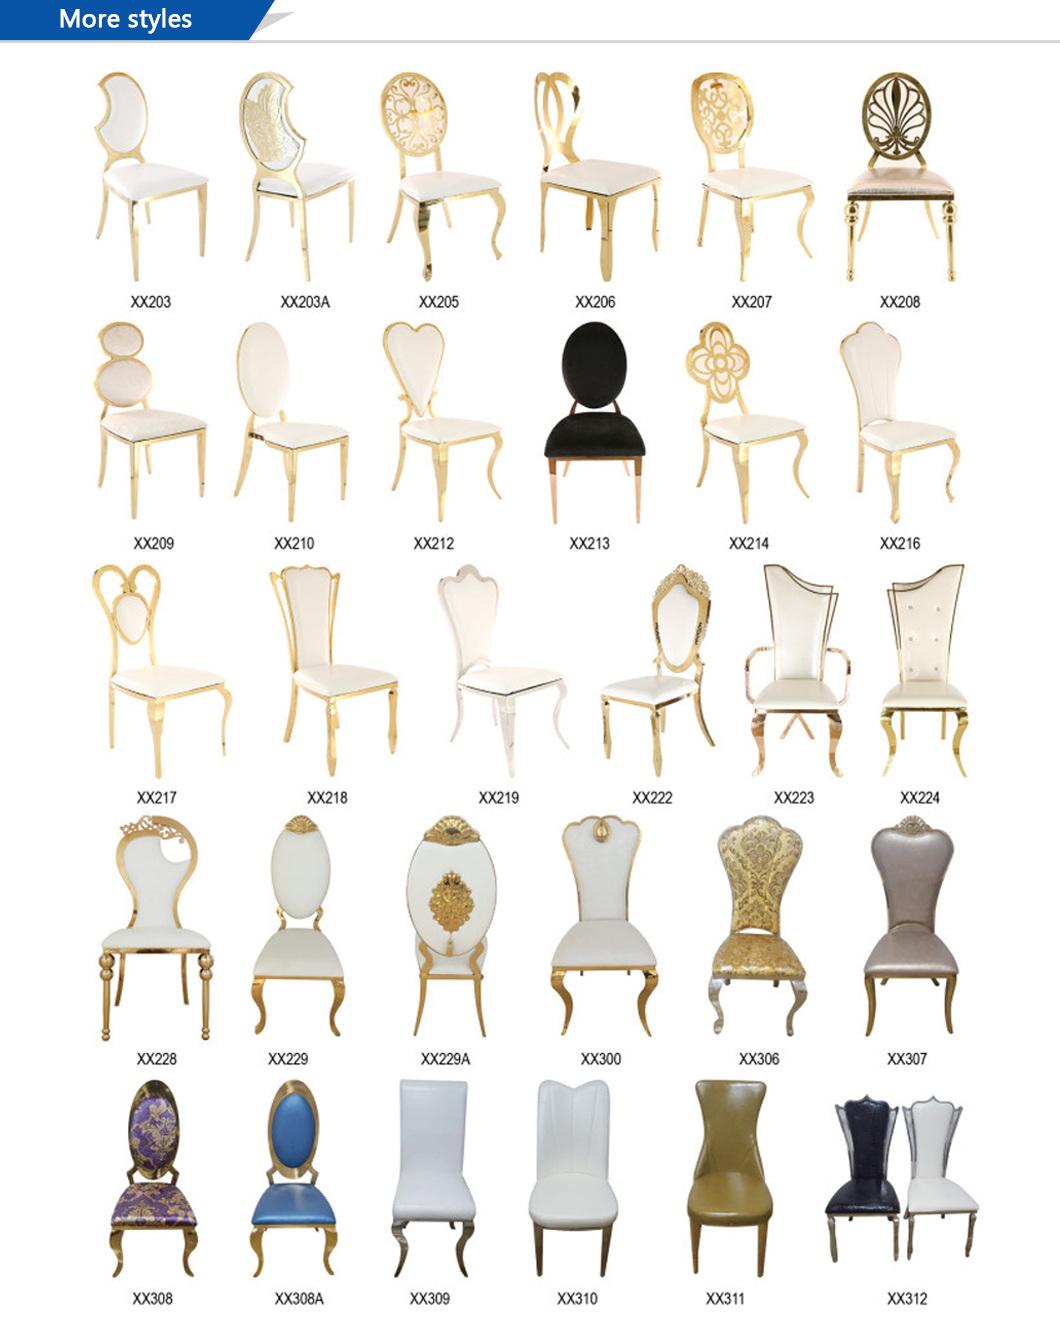 Gold Stainless Steel Frame Oval Carved Back Chairs Used Wedding for Sale